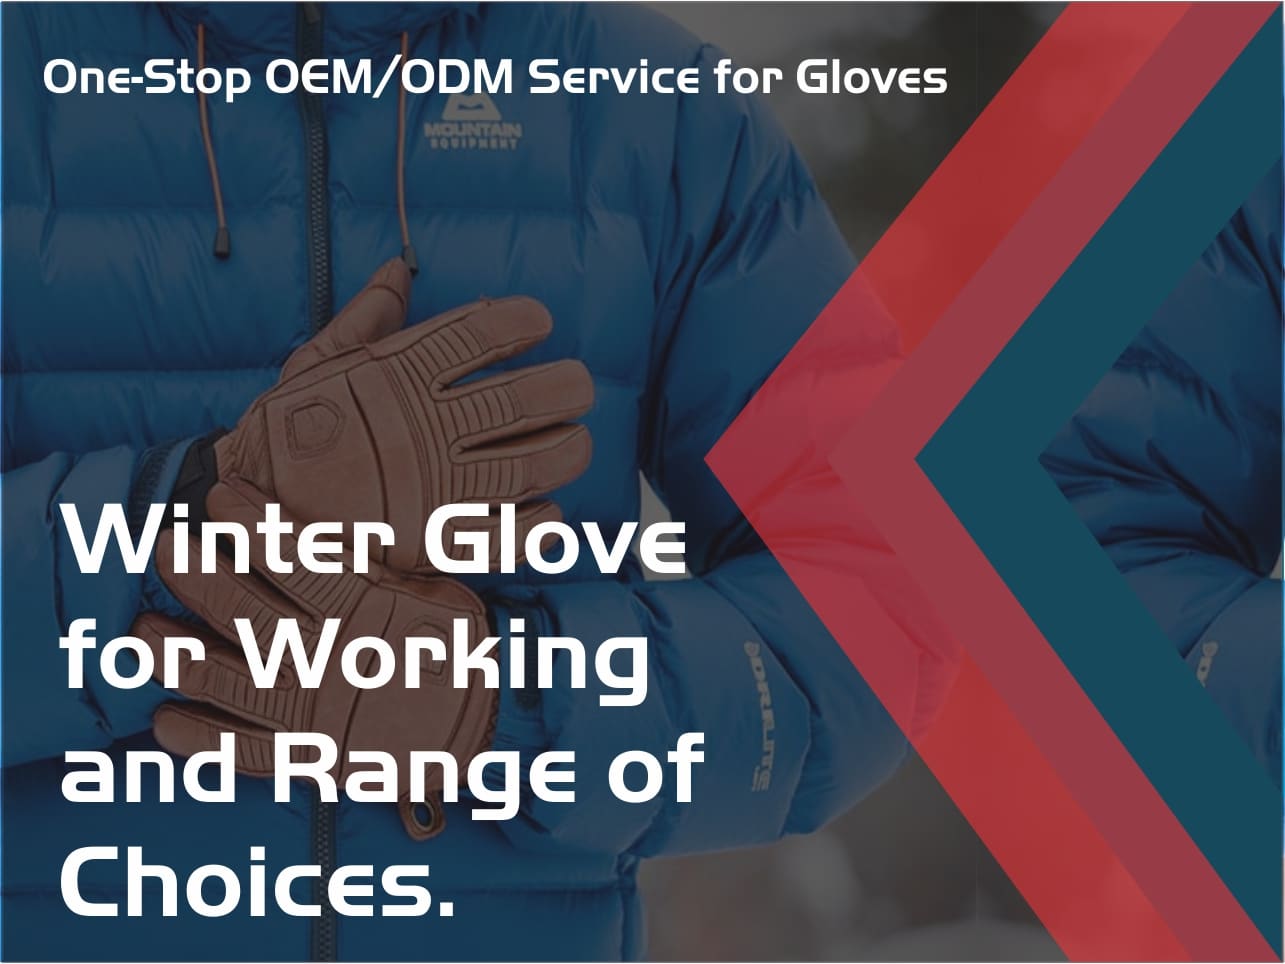 You are currently viewing Winter Glove for Working: One-Stop OEM/ODM Service